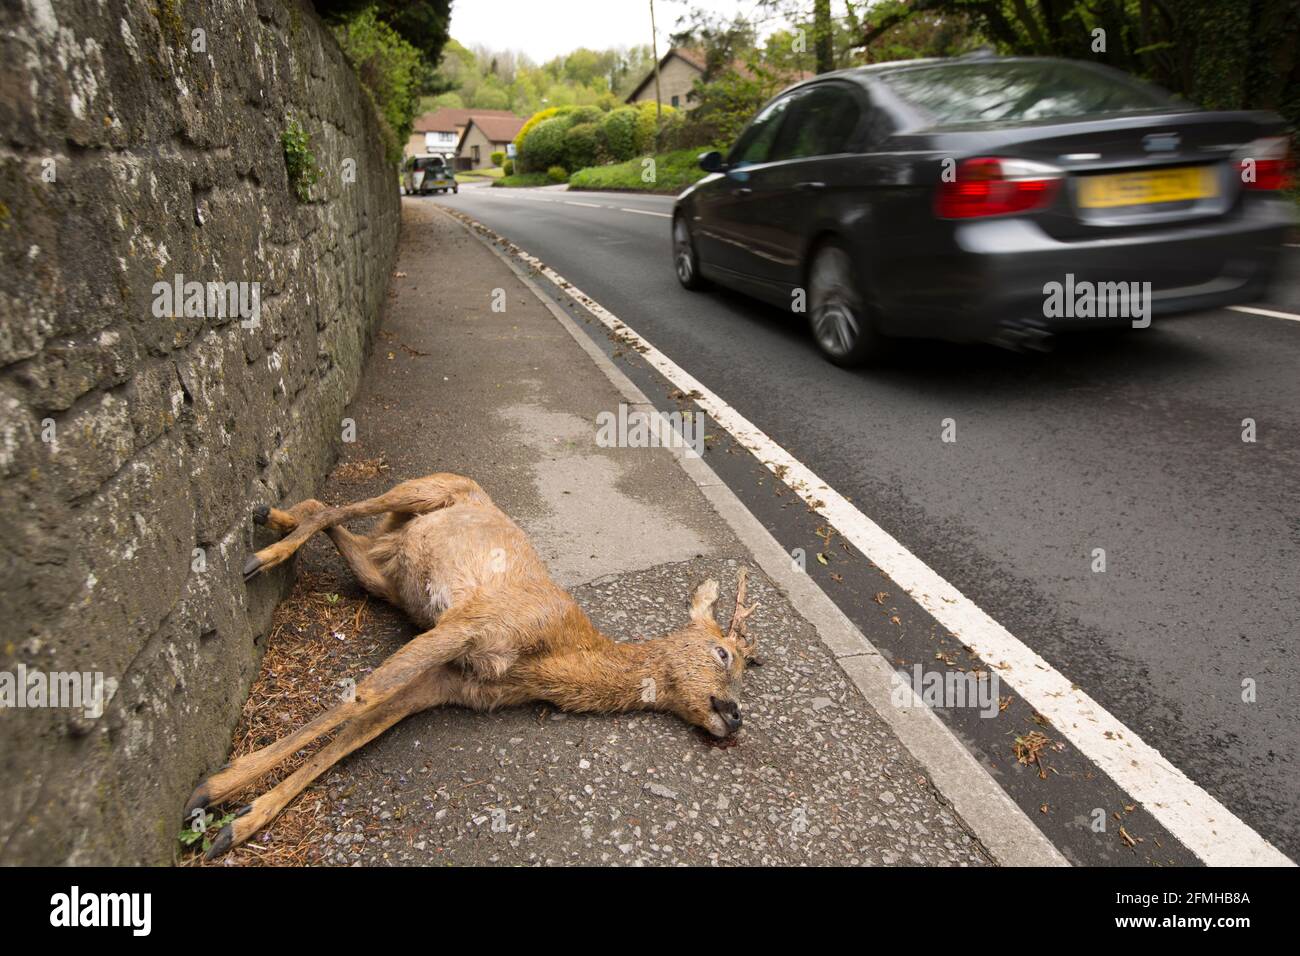 A dead roebuck, Capreolus capreolus, lying on pavement near housing after being struck by a vehicle. North Dorset England UK GB Stock Photo